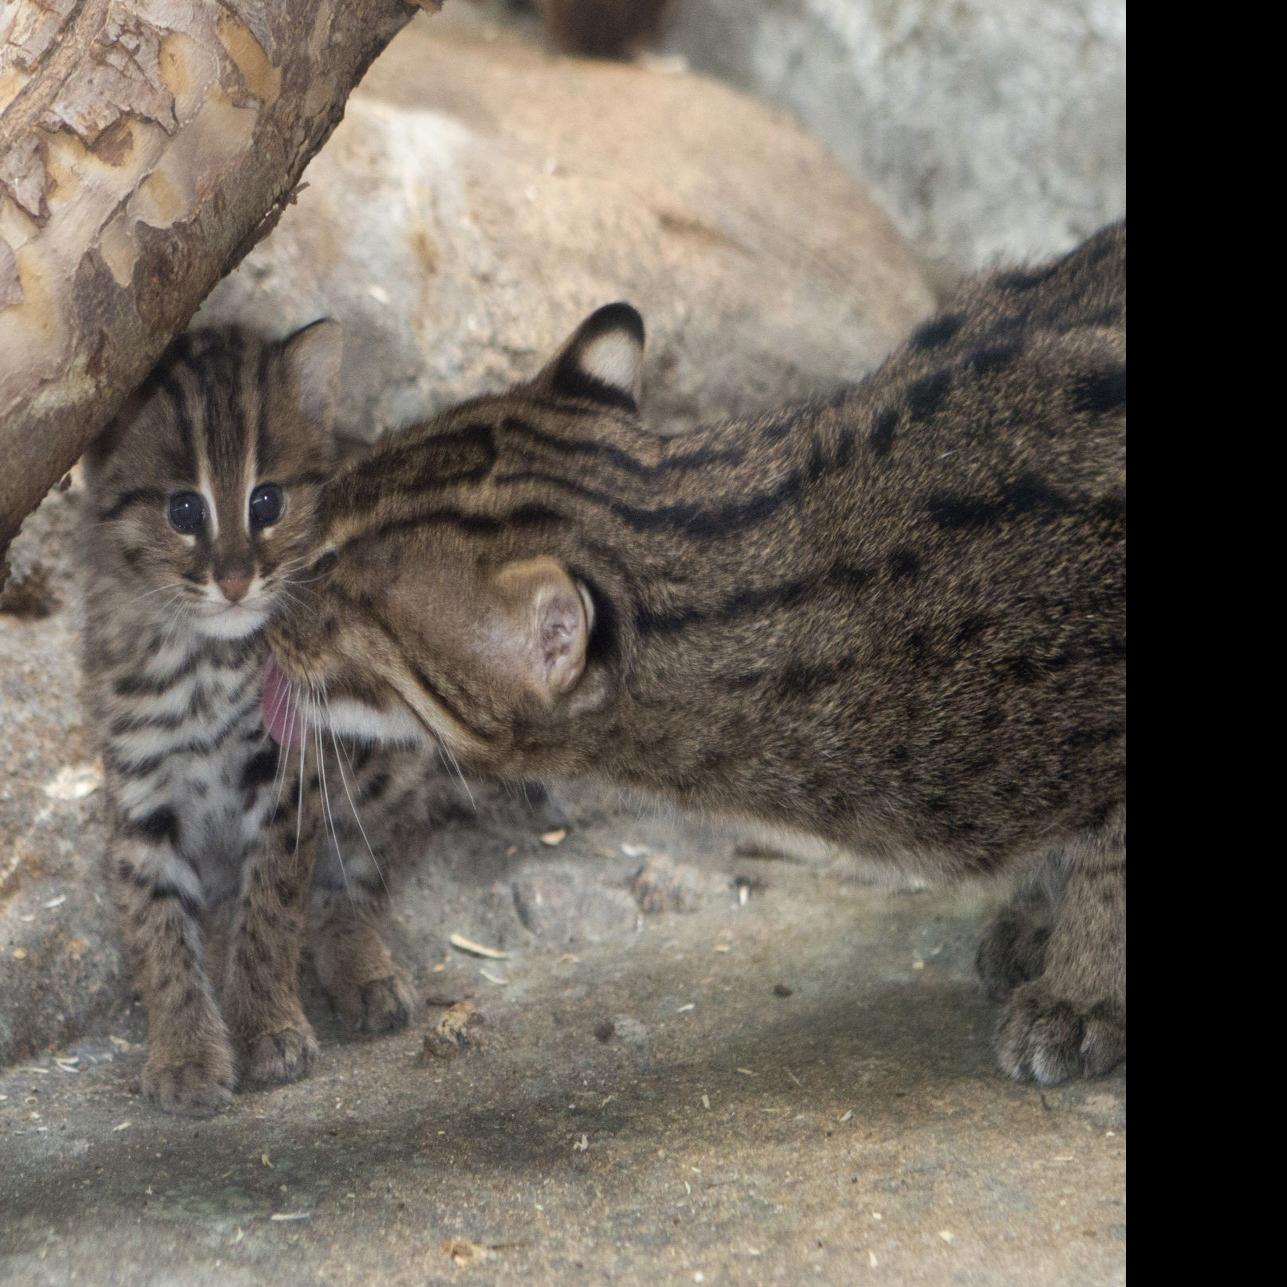 Newborn fishing cat at Denver Zoo is already on the hunt, News